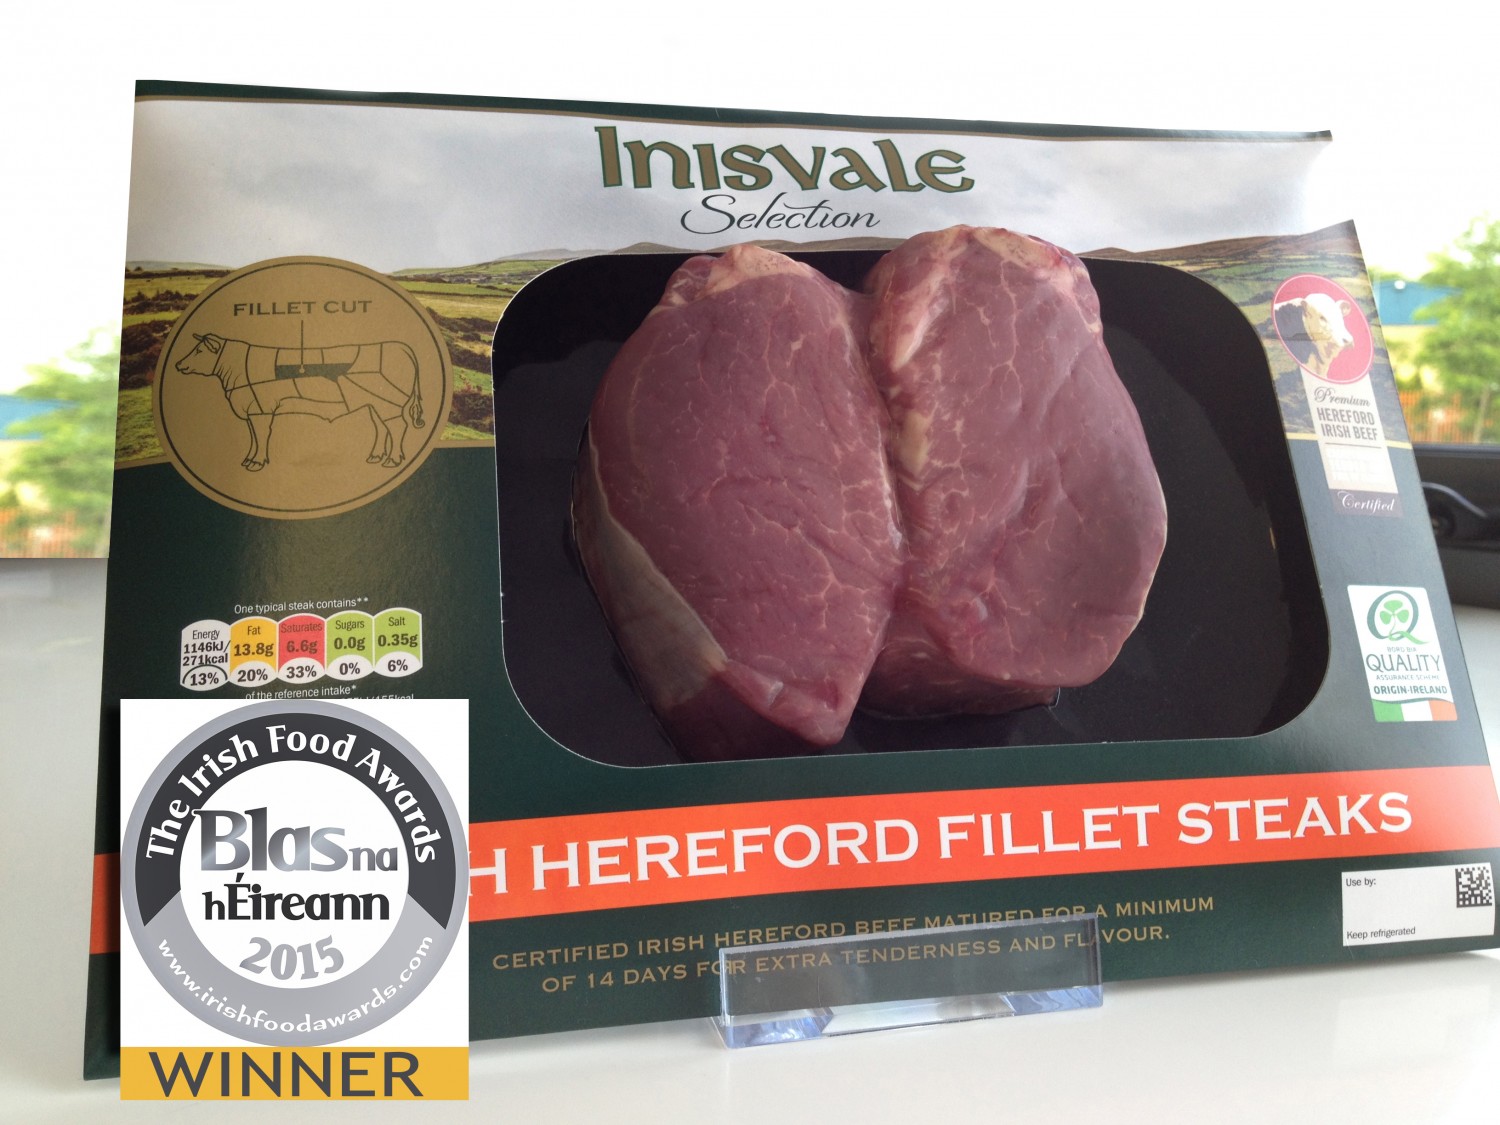 Steaks are high for award-winning Linden Foods